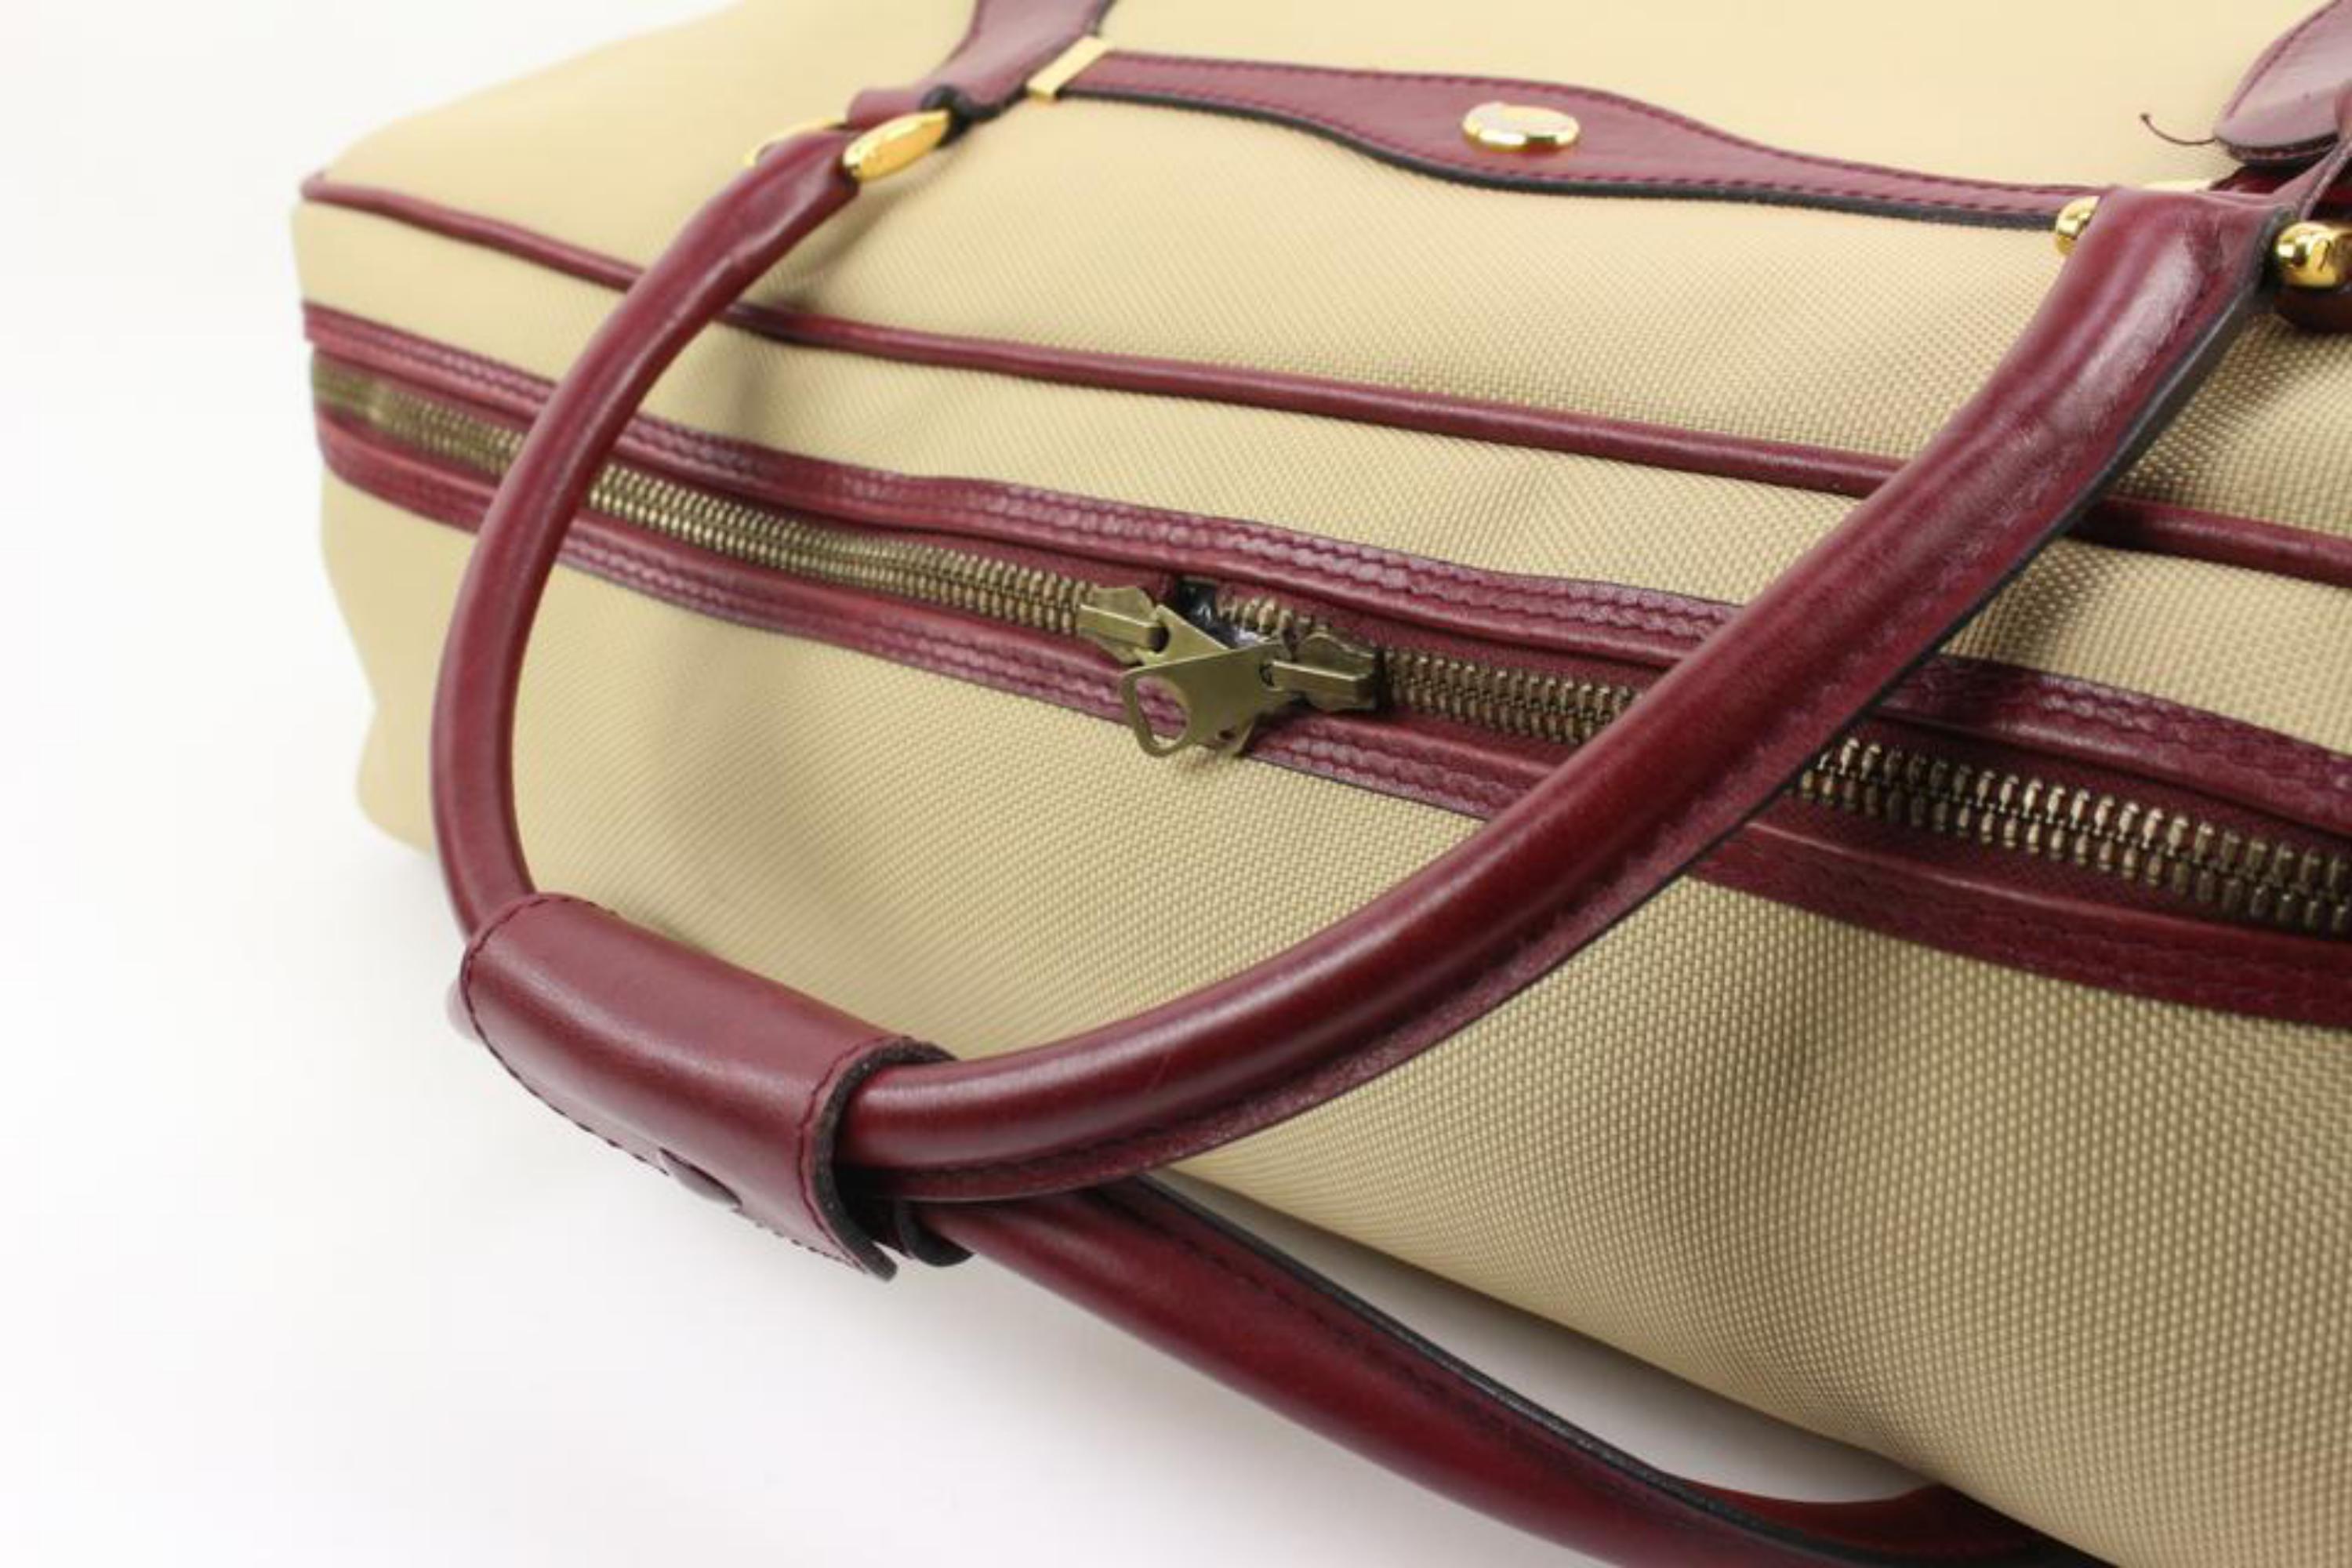 Gucci Large Beige x Burgundy Suitcase Luggage 63g218s In Good Condition For Sale In Dix hills, NY